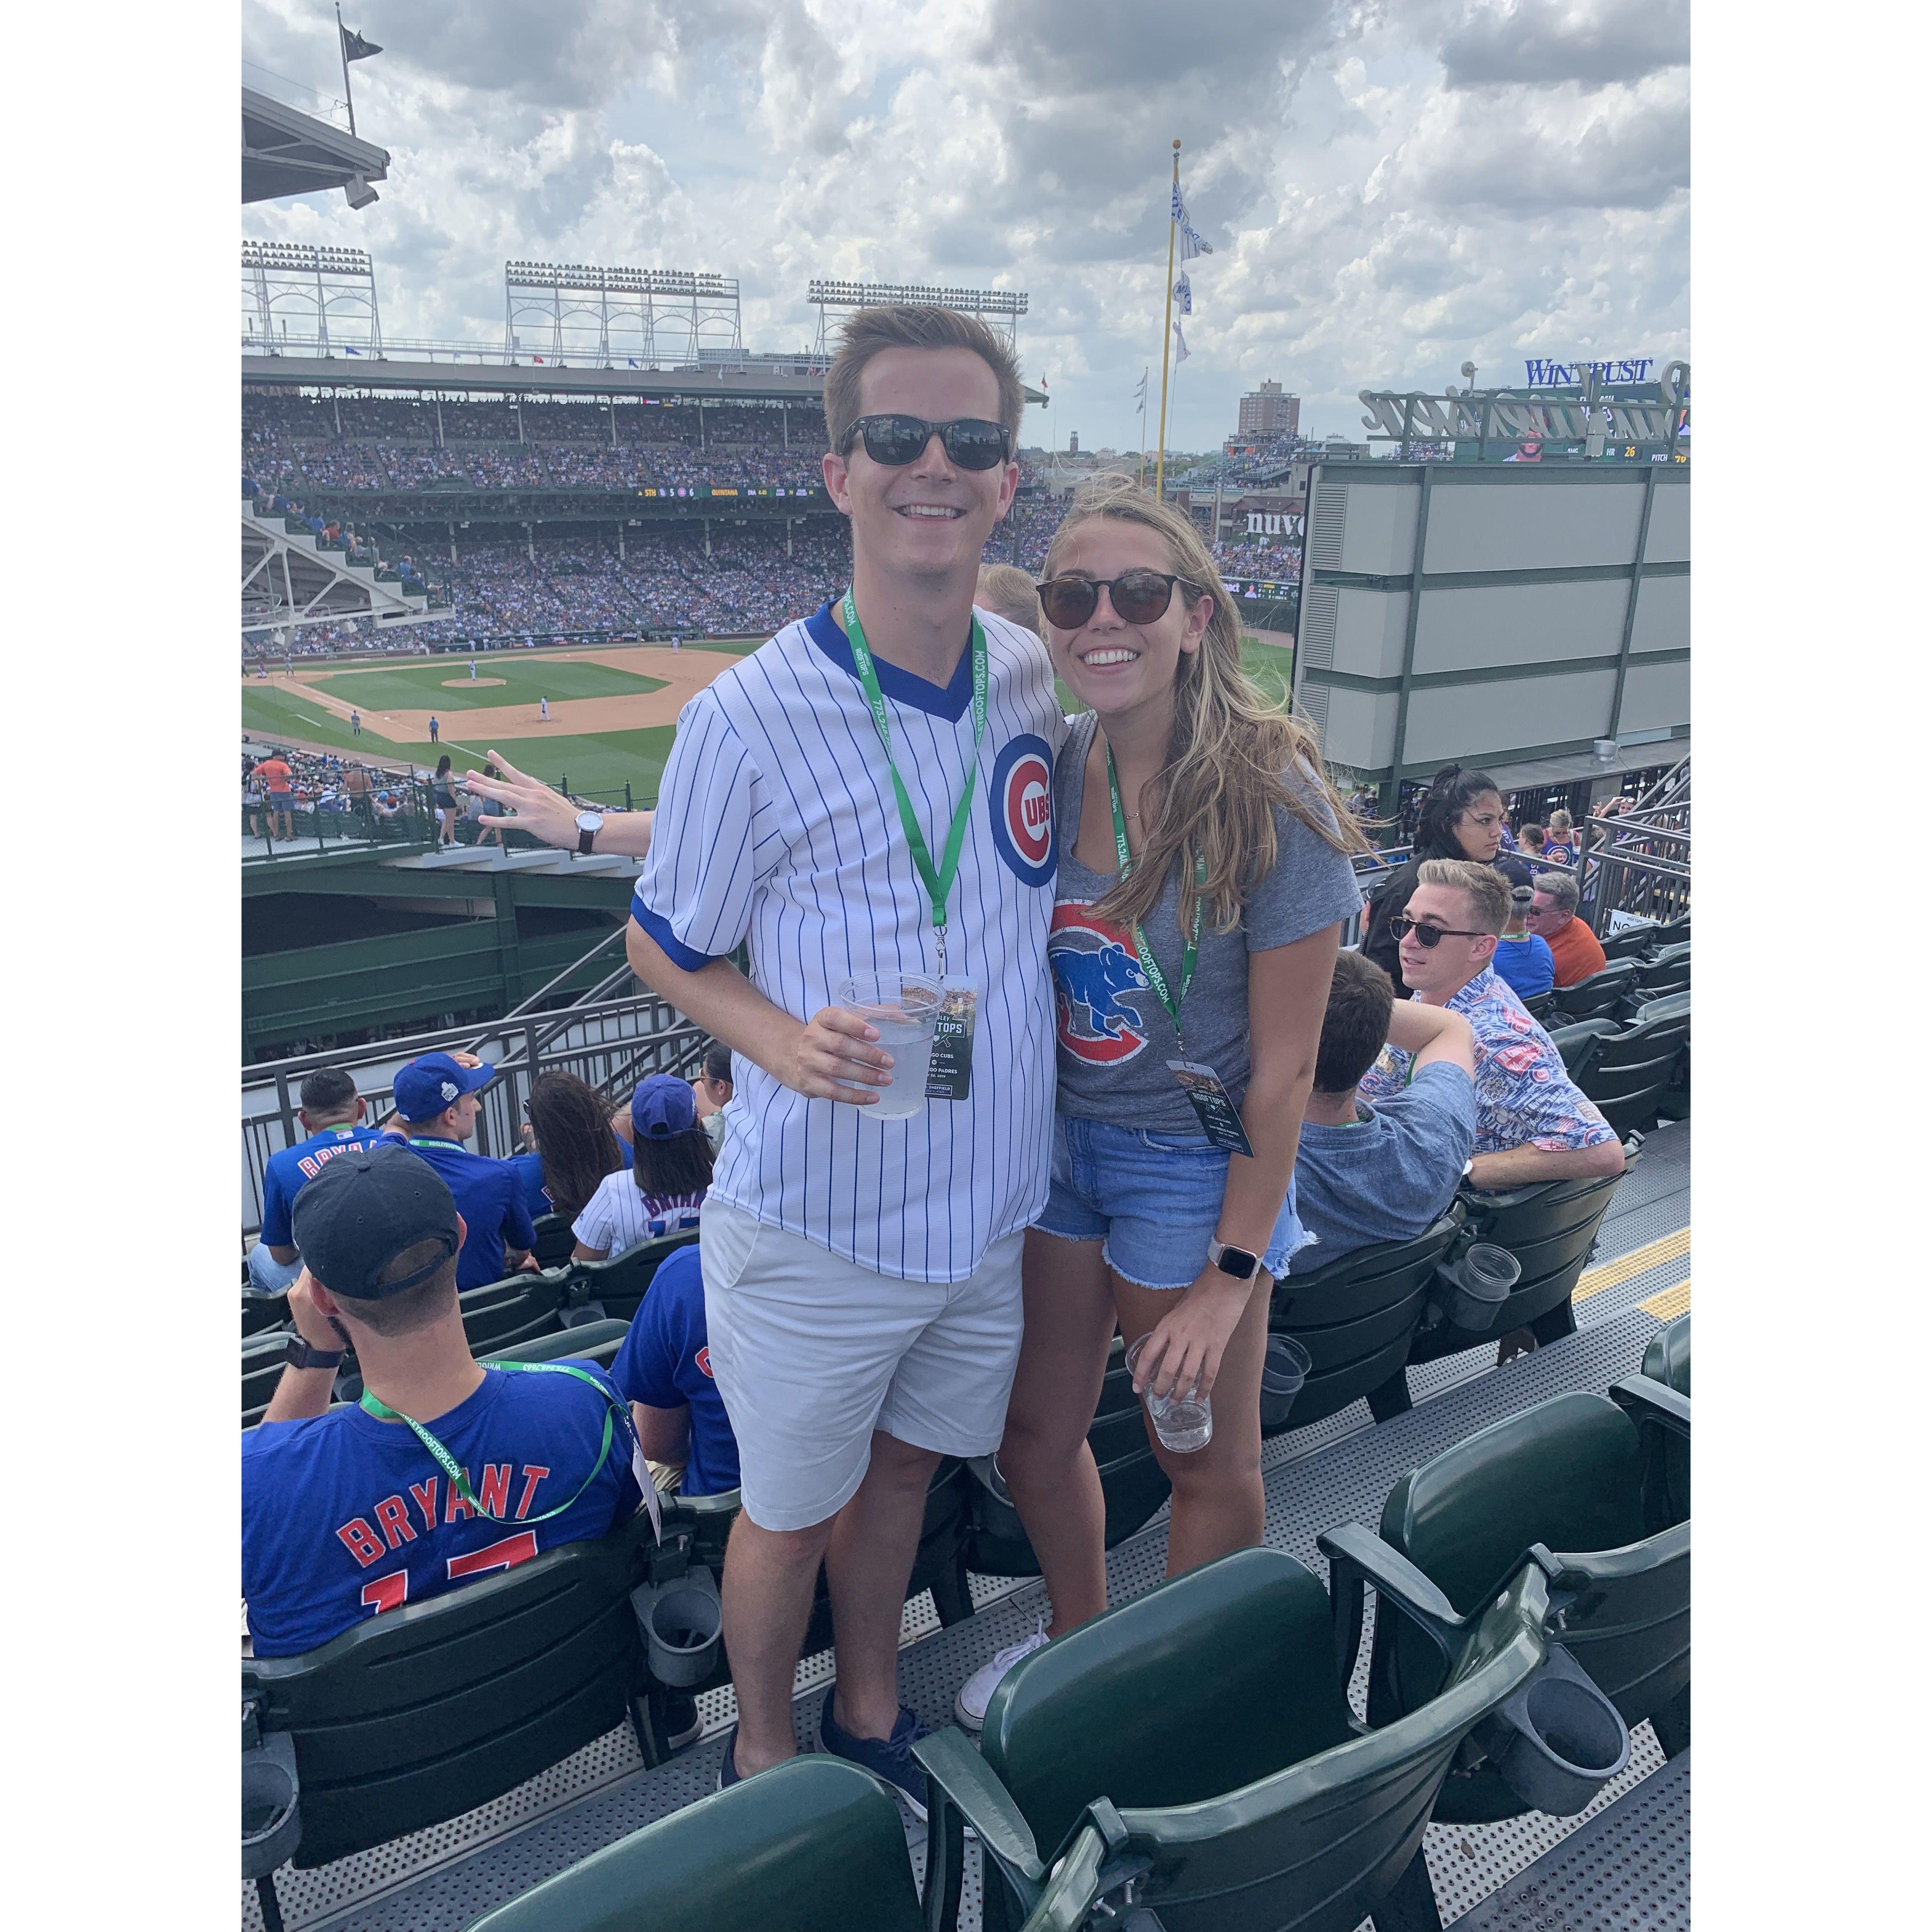 July 2019 - A rooftop Cubs game in Chicago was a fun going away party with family and friends for Luke ahead of his move to New York